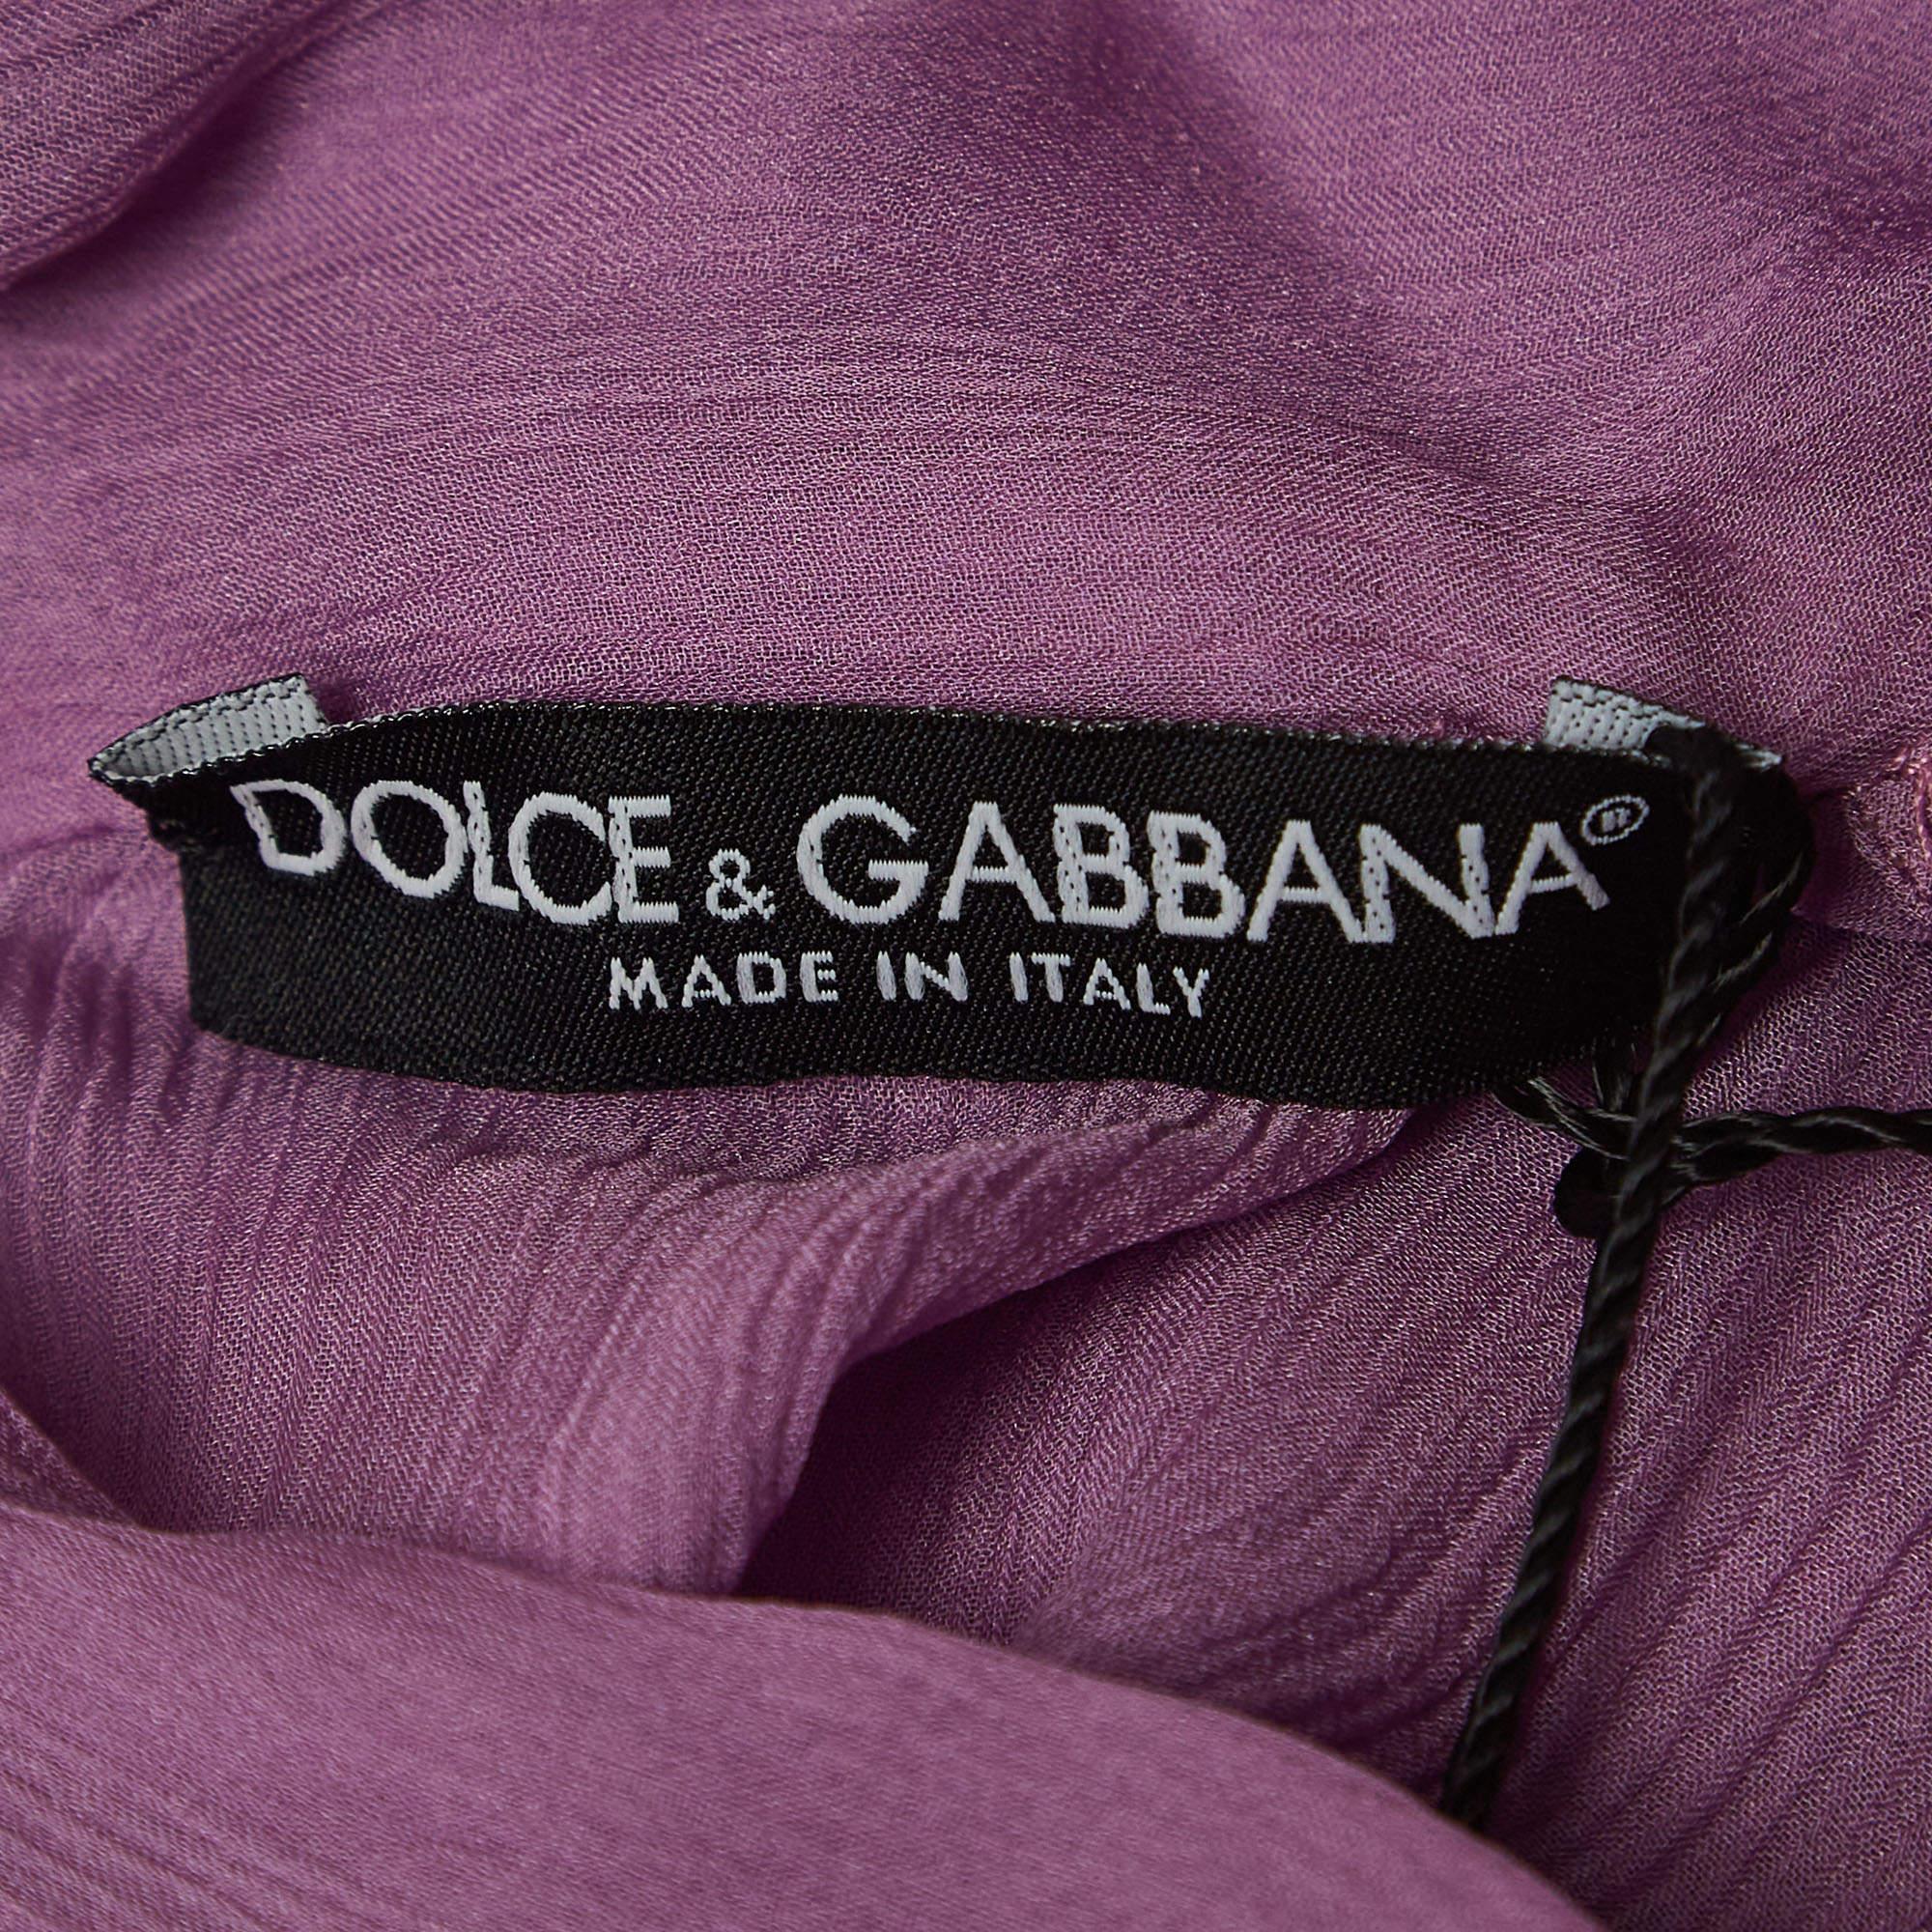 The Dolce & Gabbana blouse is a luxurious masterpiece, crafted from sumptuous silk. This elegant piece features a tasteful tie-up detail, adding a touch of sophistication. The rich purple hue enhances its allure, making it a timeless and versatile